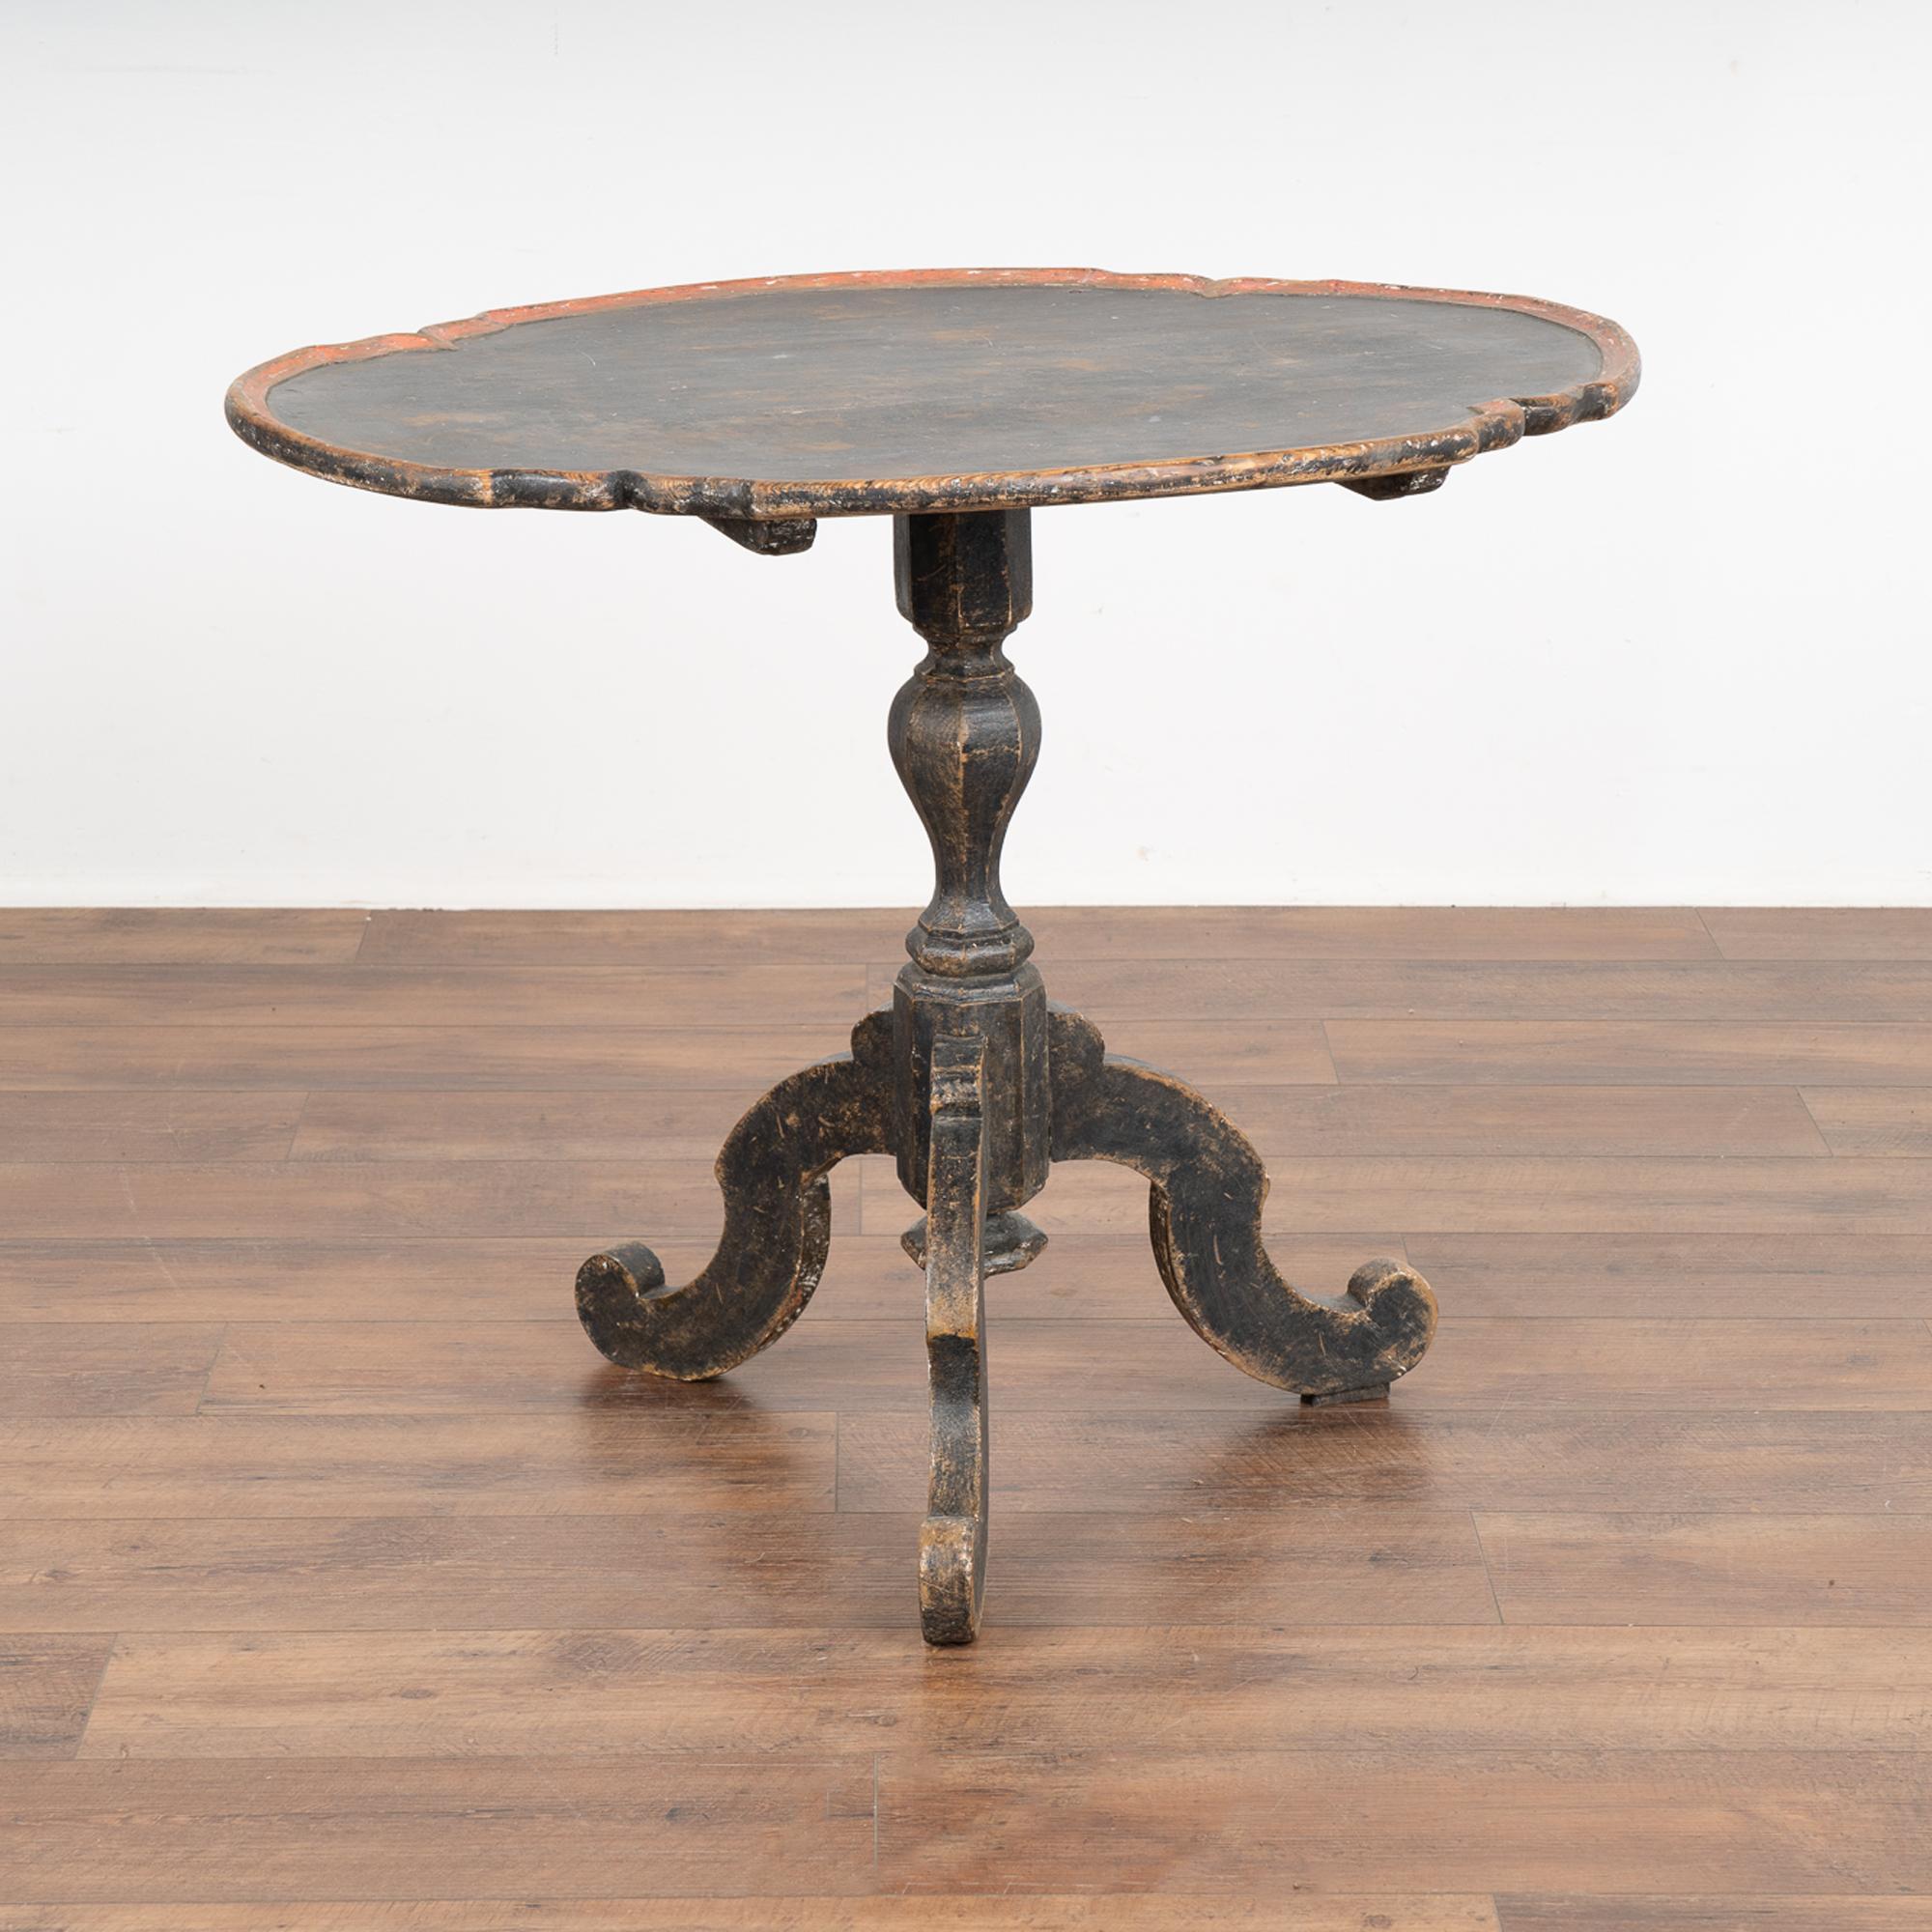 The aged patina of the original black paint accentuates the curves and grace of this Rococo tilt top table side table.
The black painted finish with red trim around the edge has a warm aged patina from generations of use, distressed to reveal the